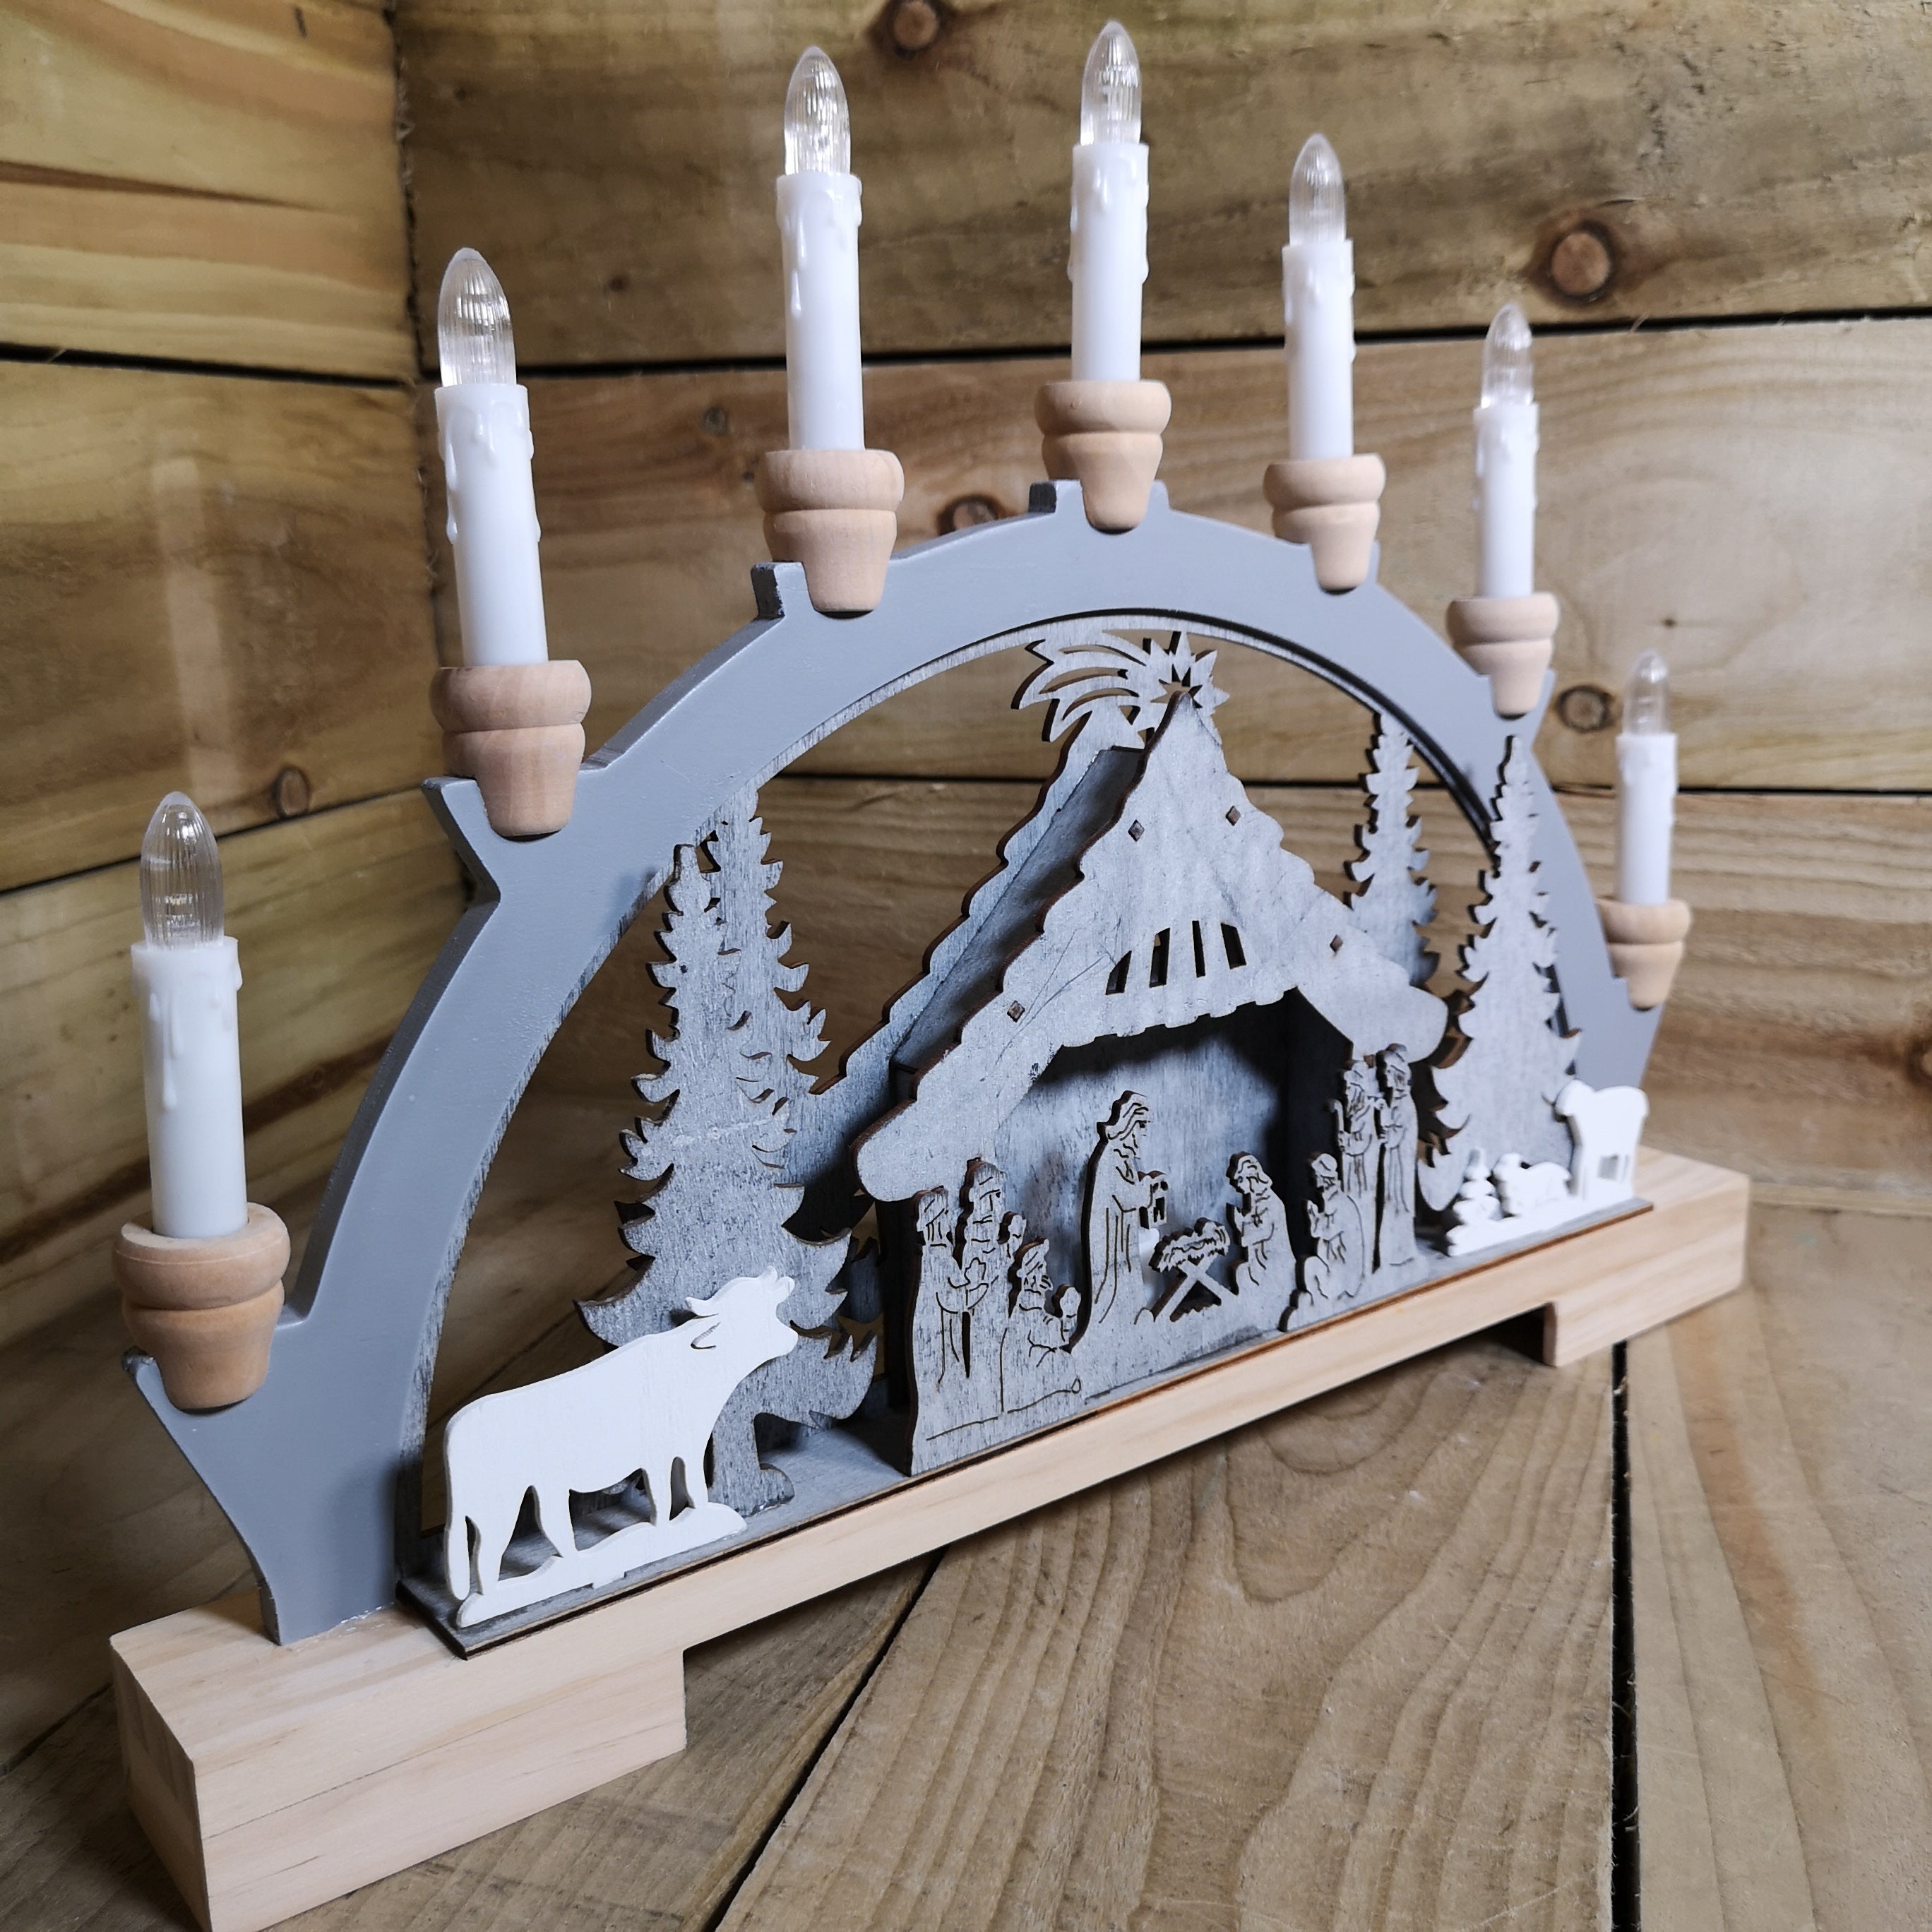 45cm Battery Operated Christmas Lit Wooden Nativity Silhouette  Candle Bridge